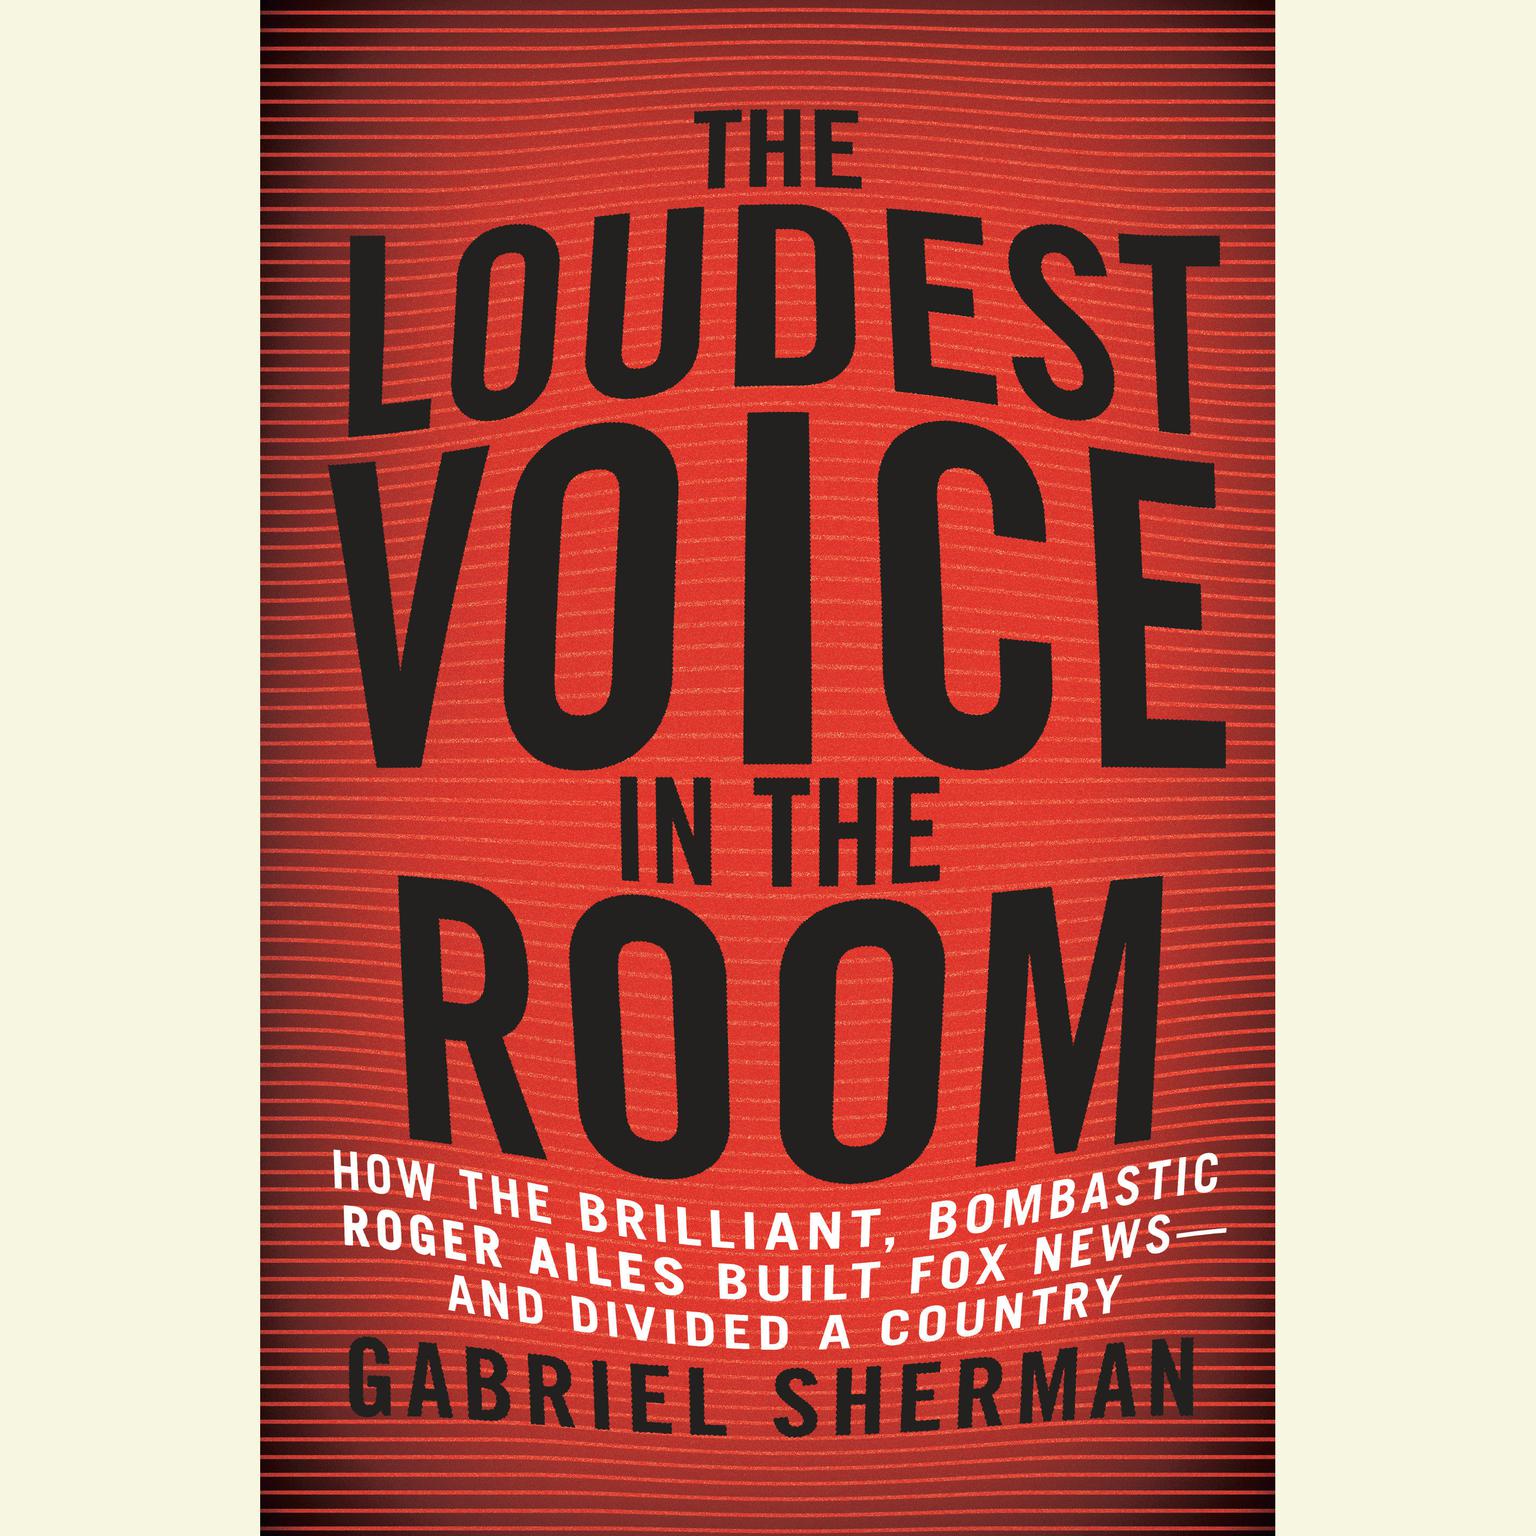 The Loudest Voice in the Room: How the Brilliant, Bombastic Roger Ailes Built Fox News--and Divided a Country Audiobook, by Gabriel Sherman